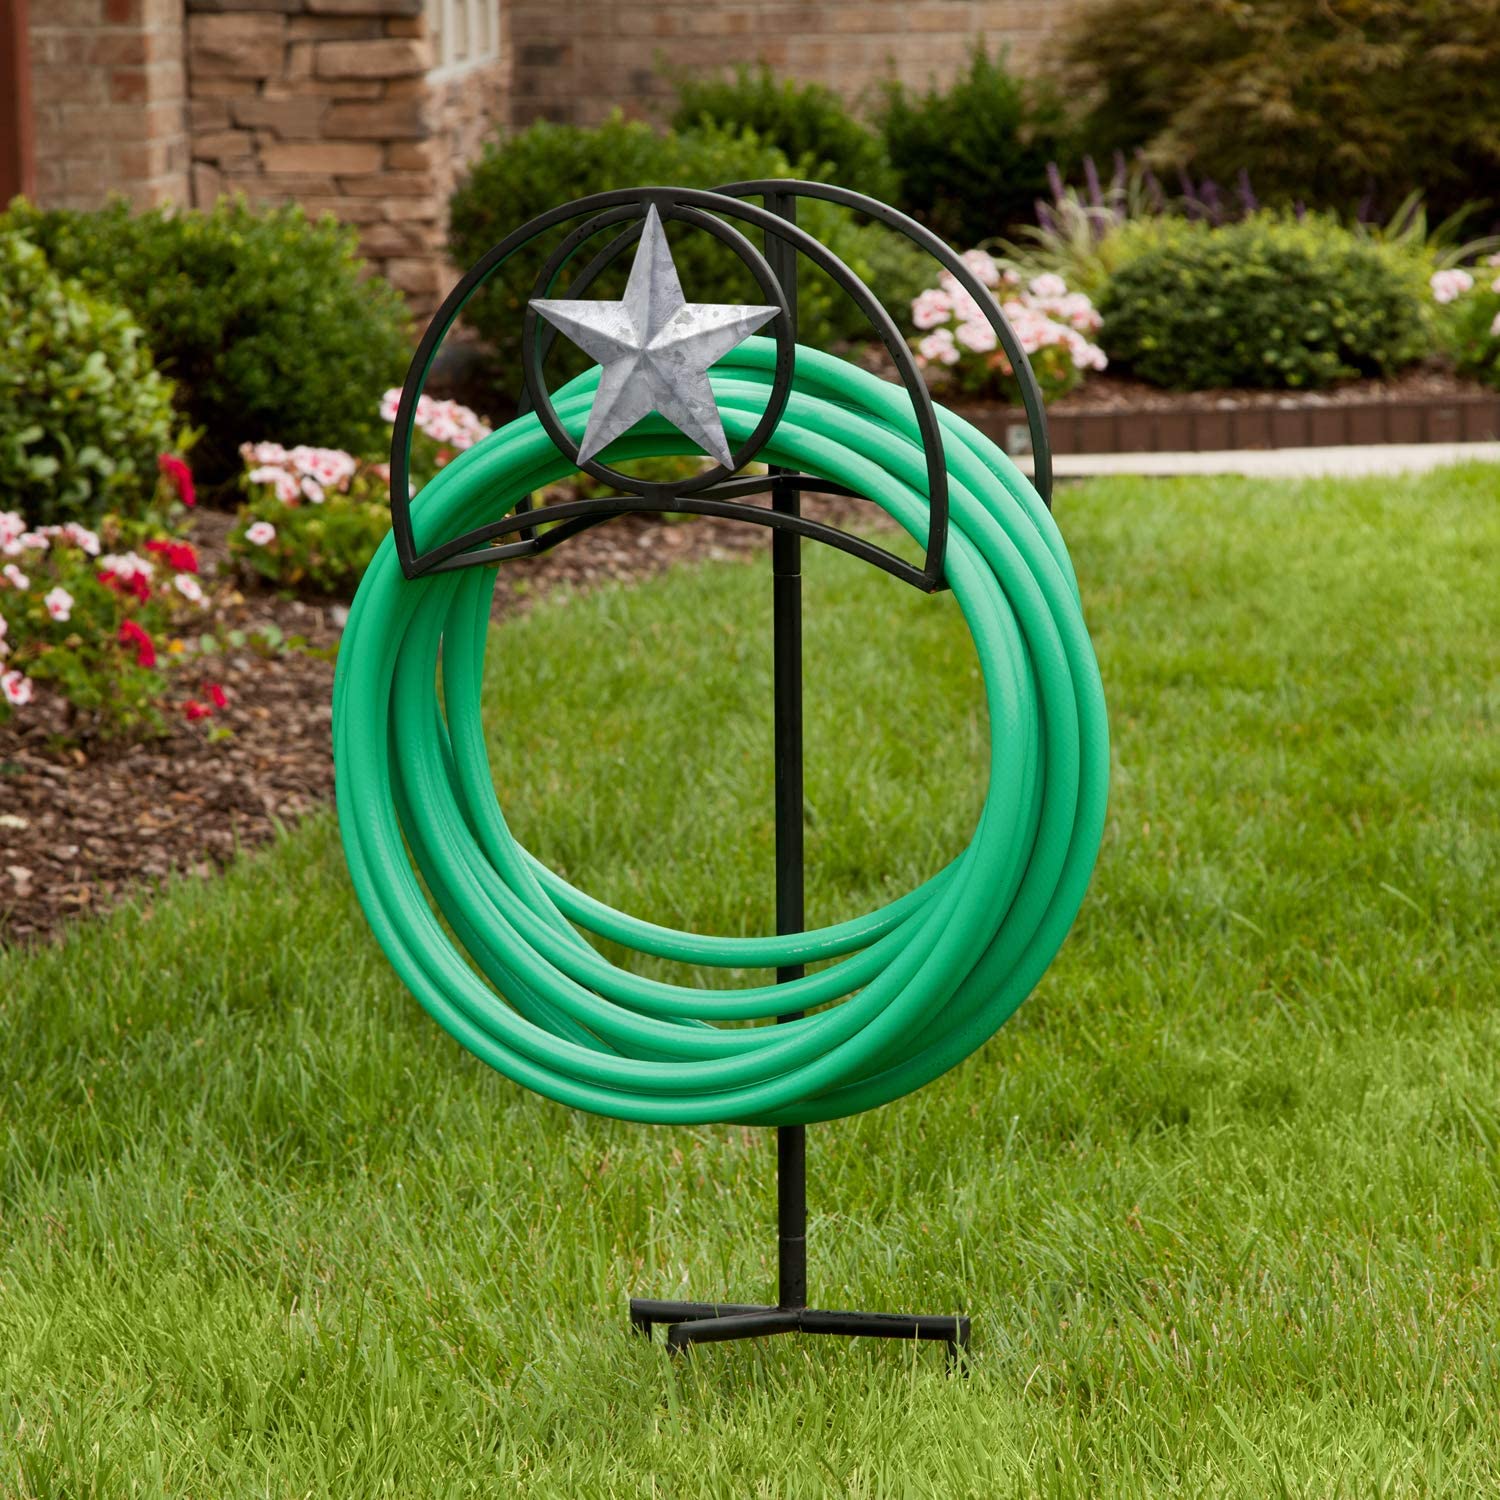 Liberty Garden Americana hose stand Steel 125-ft Stand Hose Reel